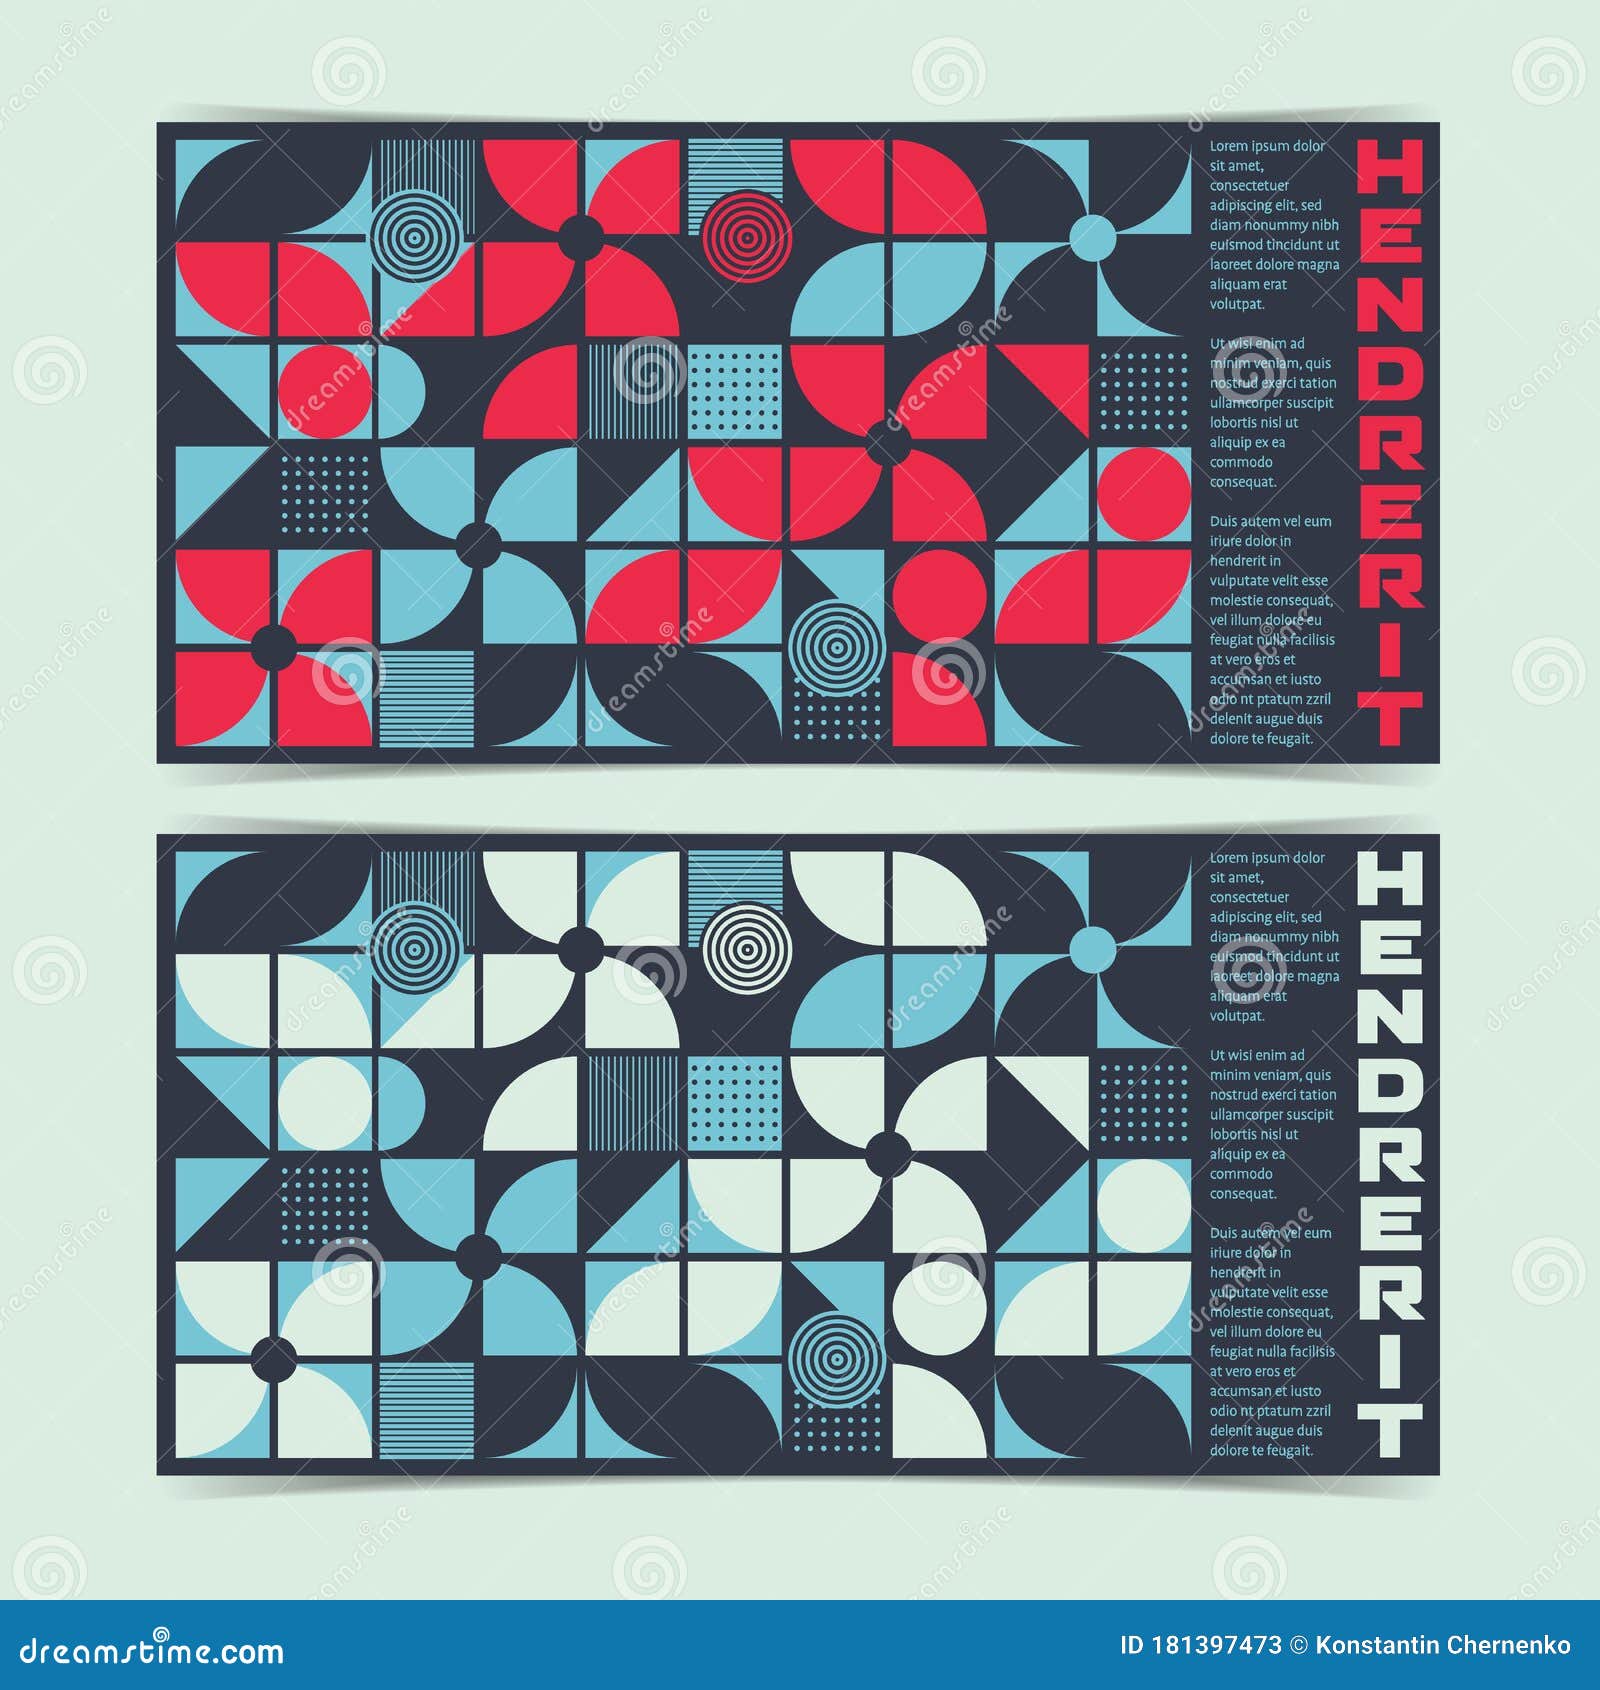 horizontal flyer template with abstract geometric  compositions.  